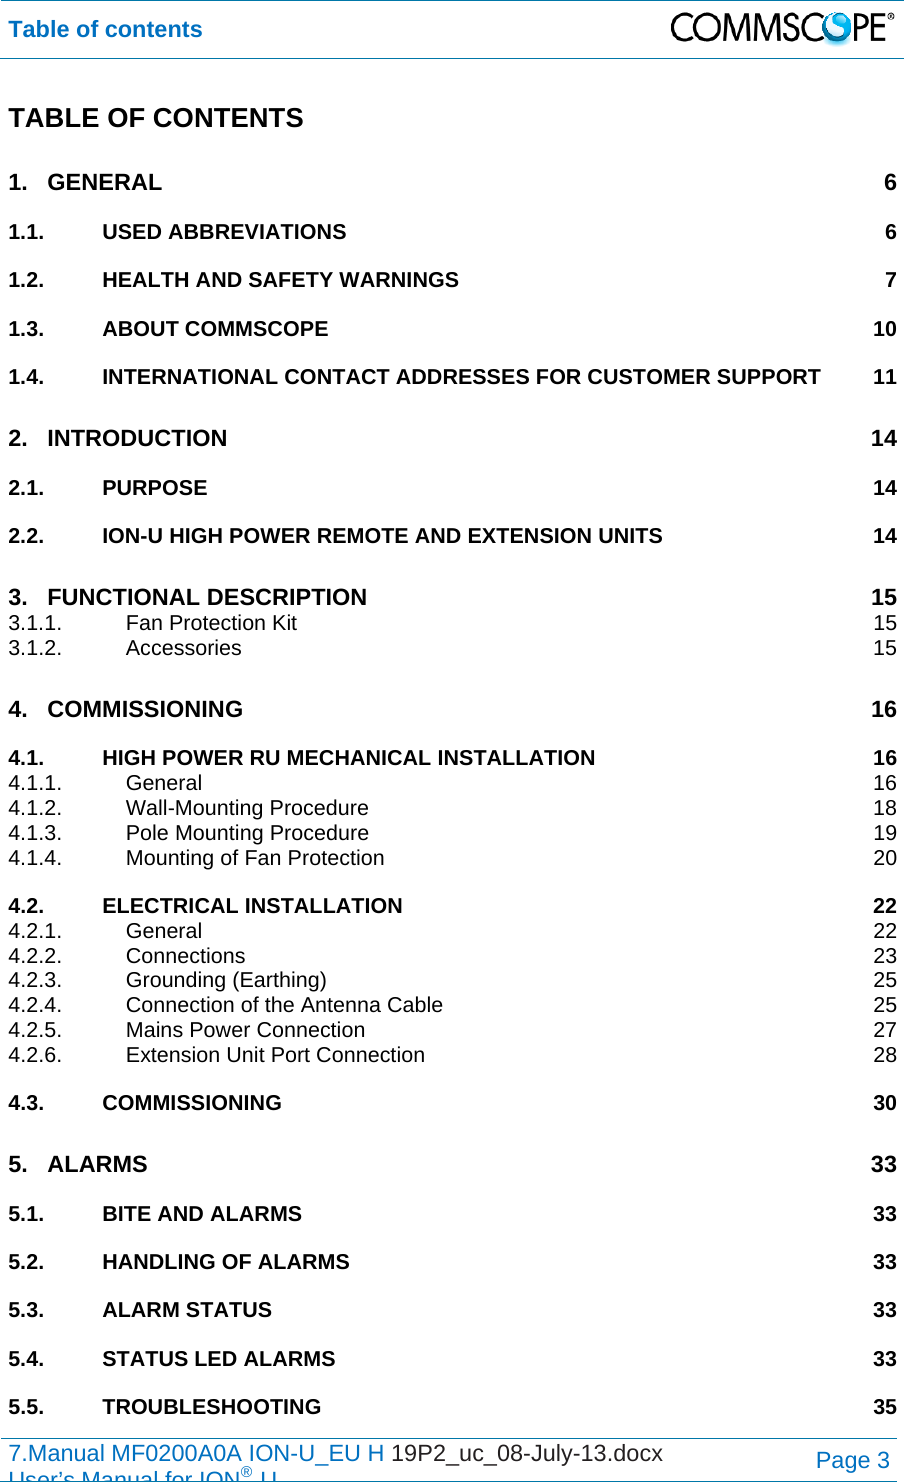 Table of contents  7.Manual MF0200A0A ION-U_EU H 19P2_uc_08-July-13.docx   User’s Manual for ION®UPage 3 TABLE OF CONTENTS 1.GENERAL 61.1.USED ABBREVIATIONS  61.2.HEALTH AND SAFETY WARNINGS  71.3.ABOUT COMMSCOPE  101.4.INTERNATIONAL CONTACT ADDRESSES FOR CUSTOMER SUPPORT  112.INTRODUCTION 142.1.PURPOSE 142.2.ION-U HIGH POWER REMOTE AND EXTENSION UNITS  143.FUNCTIONAL DESCRIPTION  153.1.1.Fan Protection Kit  153.1.2.Accessories 154.COMMISSIONING 164.1.HIGH POWER RU MECHANICAL INSTALLATION  164.1.1.General 164.1.2.Wall-Mounting Procedure  184.1.3.Pole Mounting Procedure  194.1.4.Mounting of Fan Protection  204.2.ELECTRICAL INSTALLATION  224.2.1.General 224.2.2.Connections 234.2.3.Grounding (Earthing)  254.2.4.Connection of the Antenna Cable  254.2.5.Mains Power Connection  274.2.6.Extension Unit Port Connection  284.3.COMMISSIONING 305.ALARMS 335.1.BITE AND ALARMS  335.2.HANDLING OF ALARMS  335.3.ALARM STATUS  335.4.STATUS LED ALARMS  335.5.TROUBLESHOOTING 35